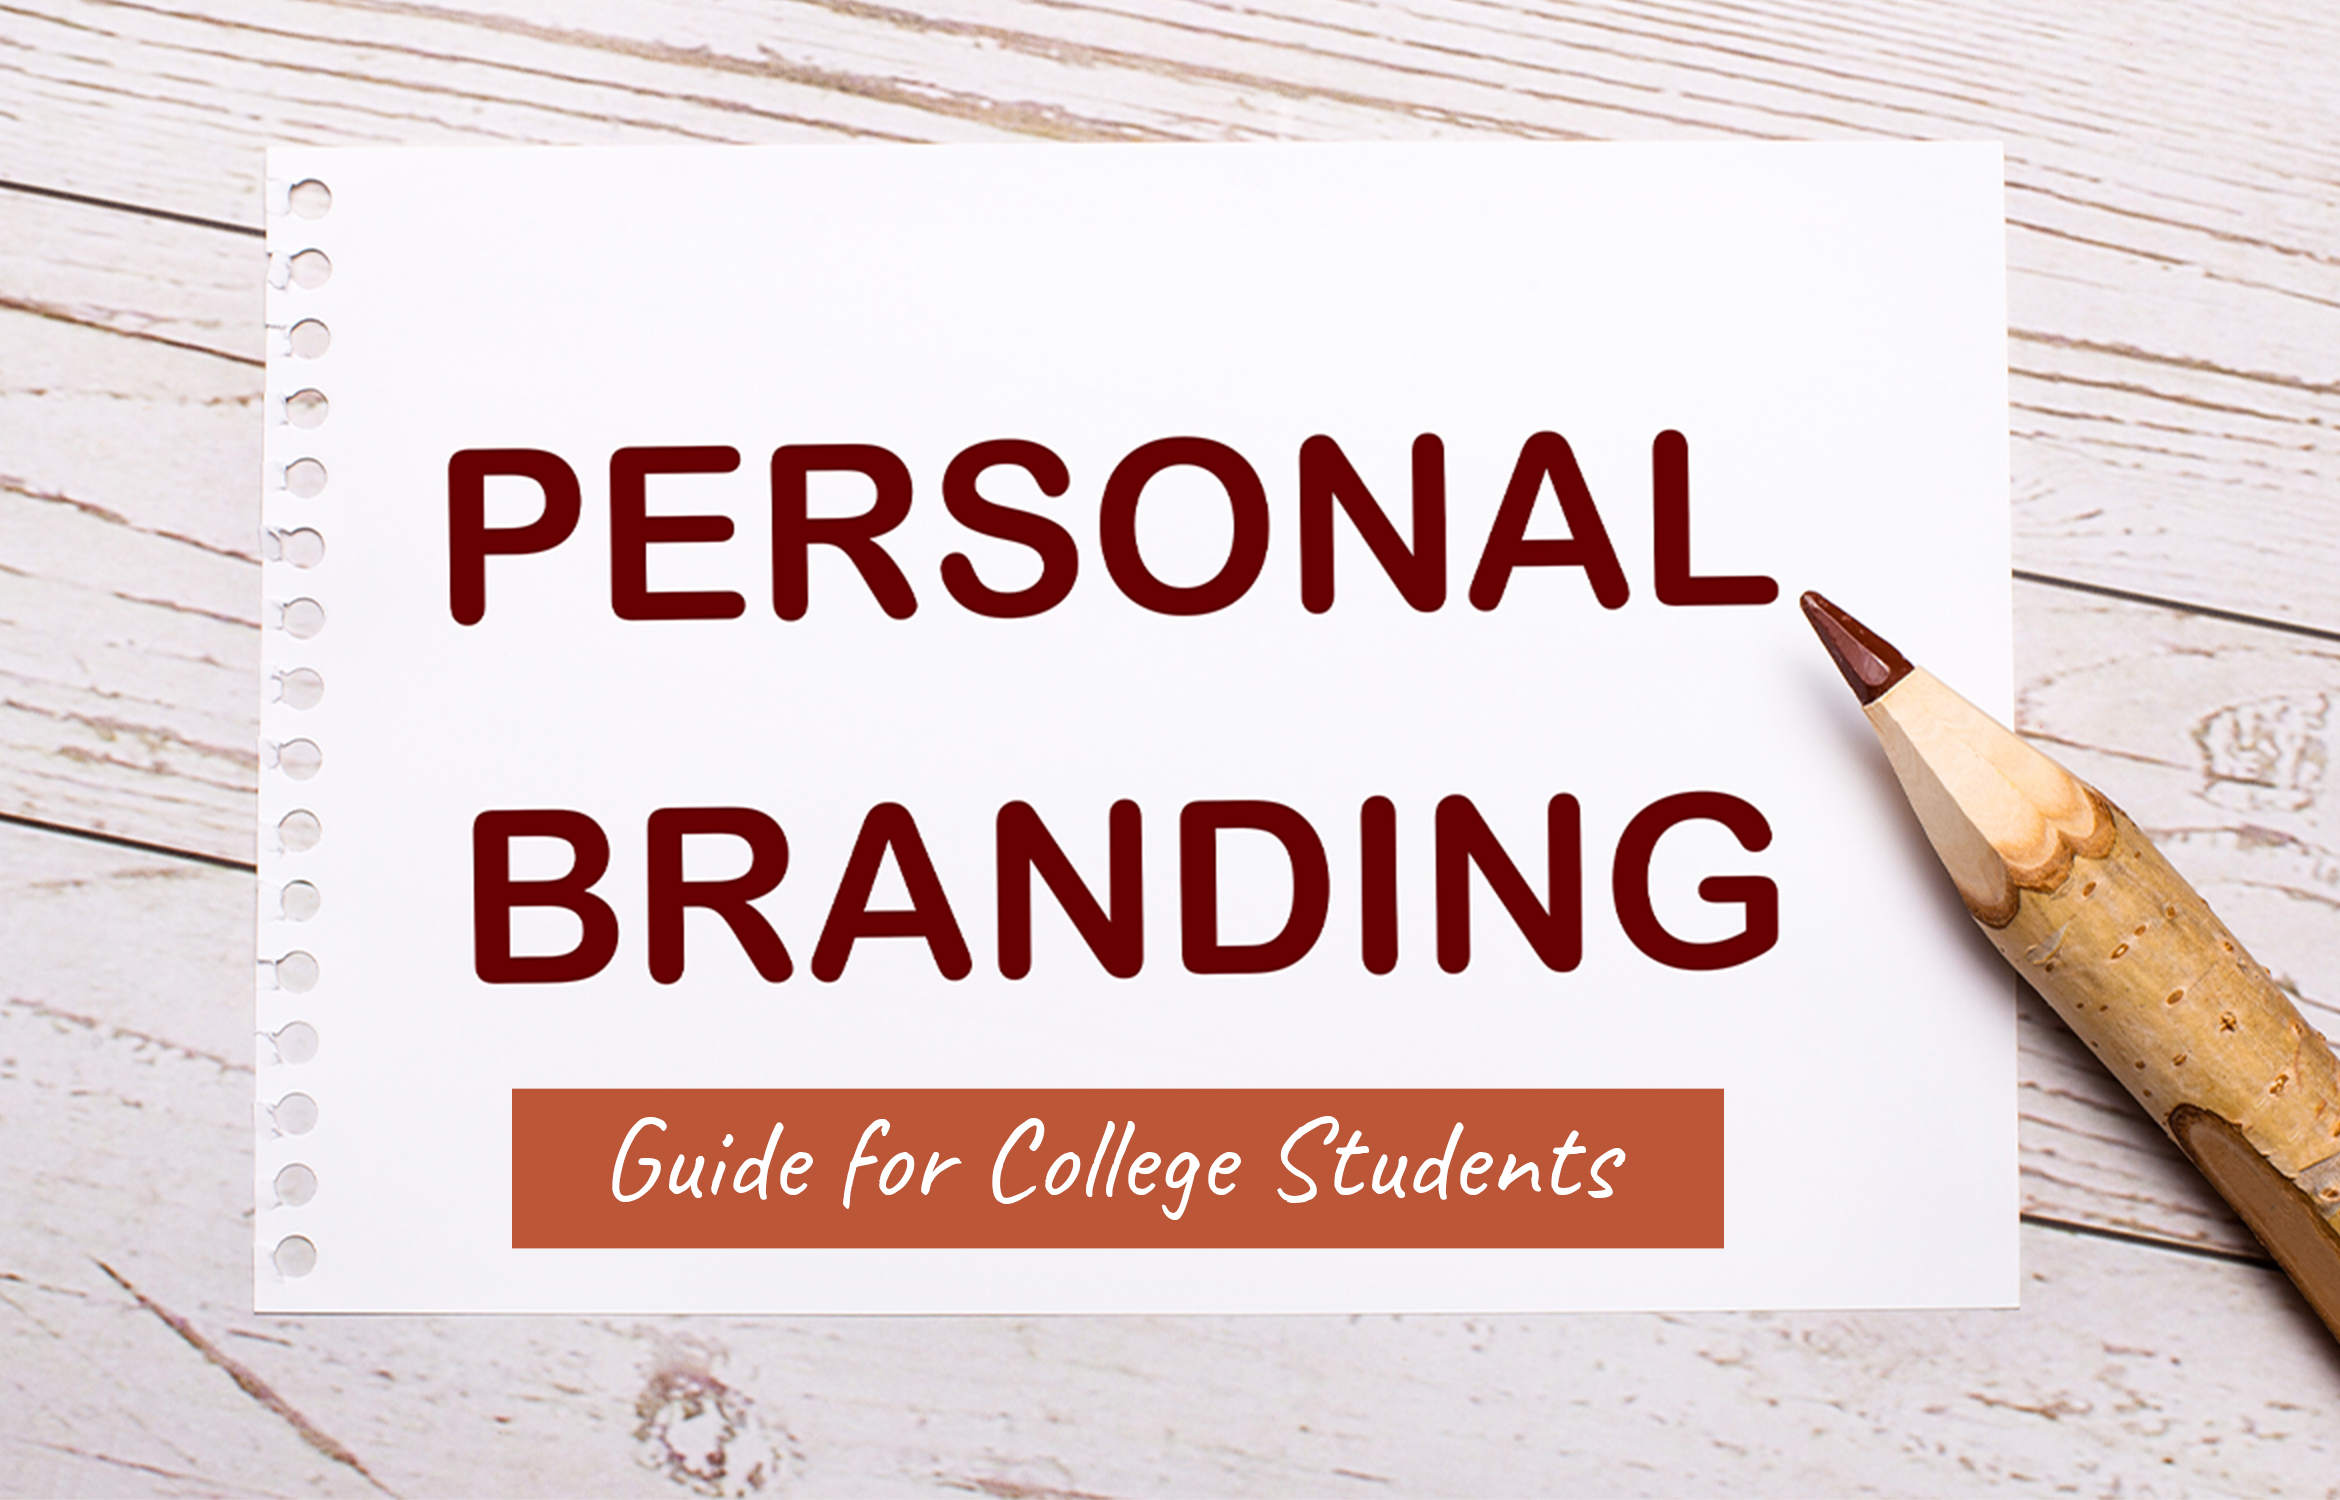 Personal Branding Guide for College Students